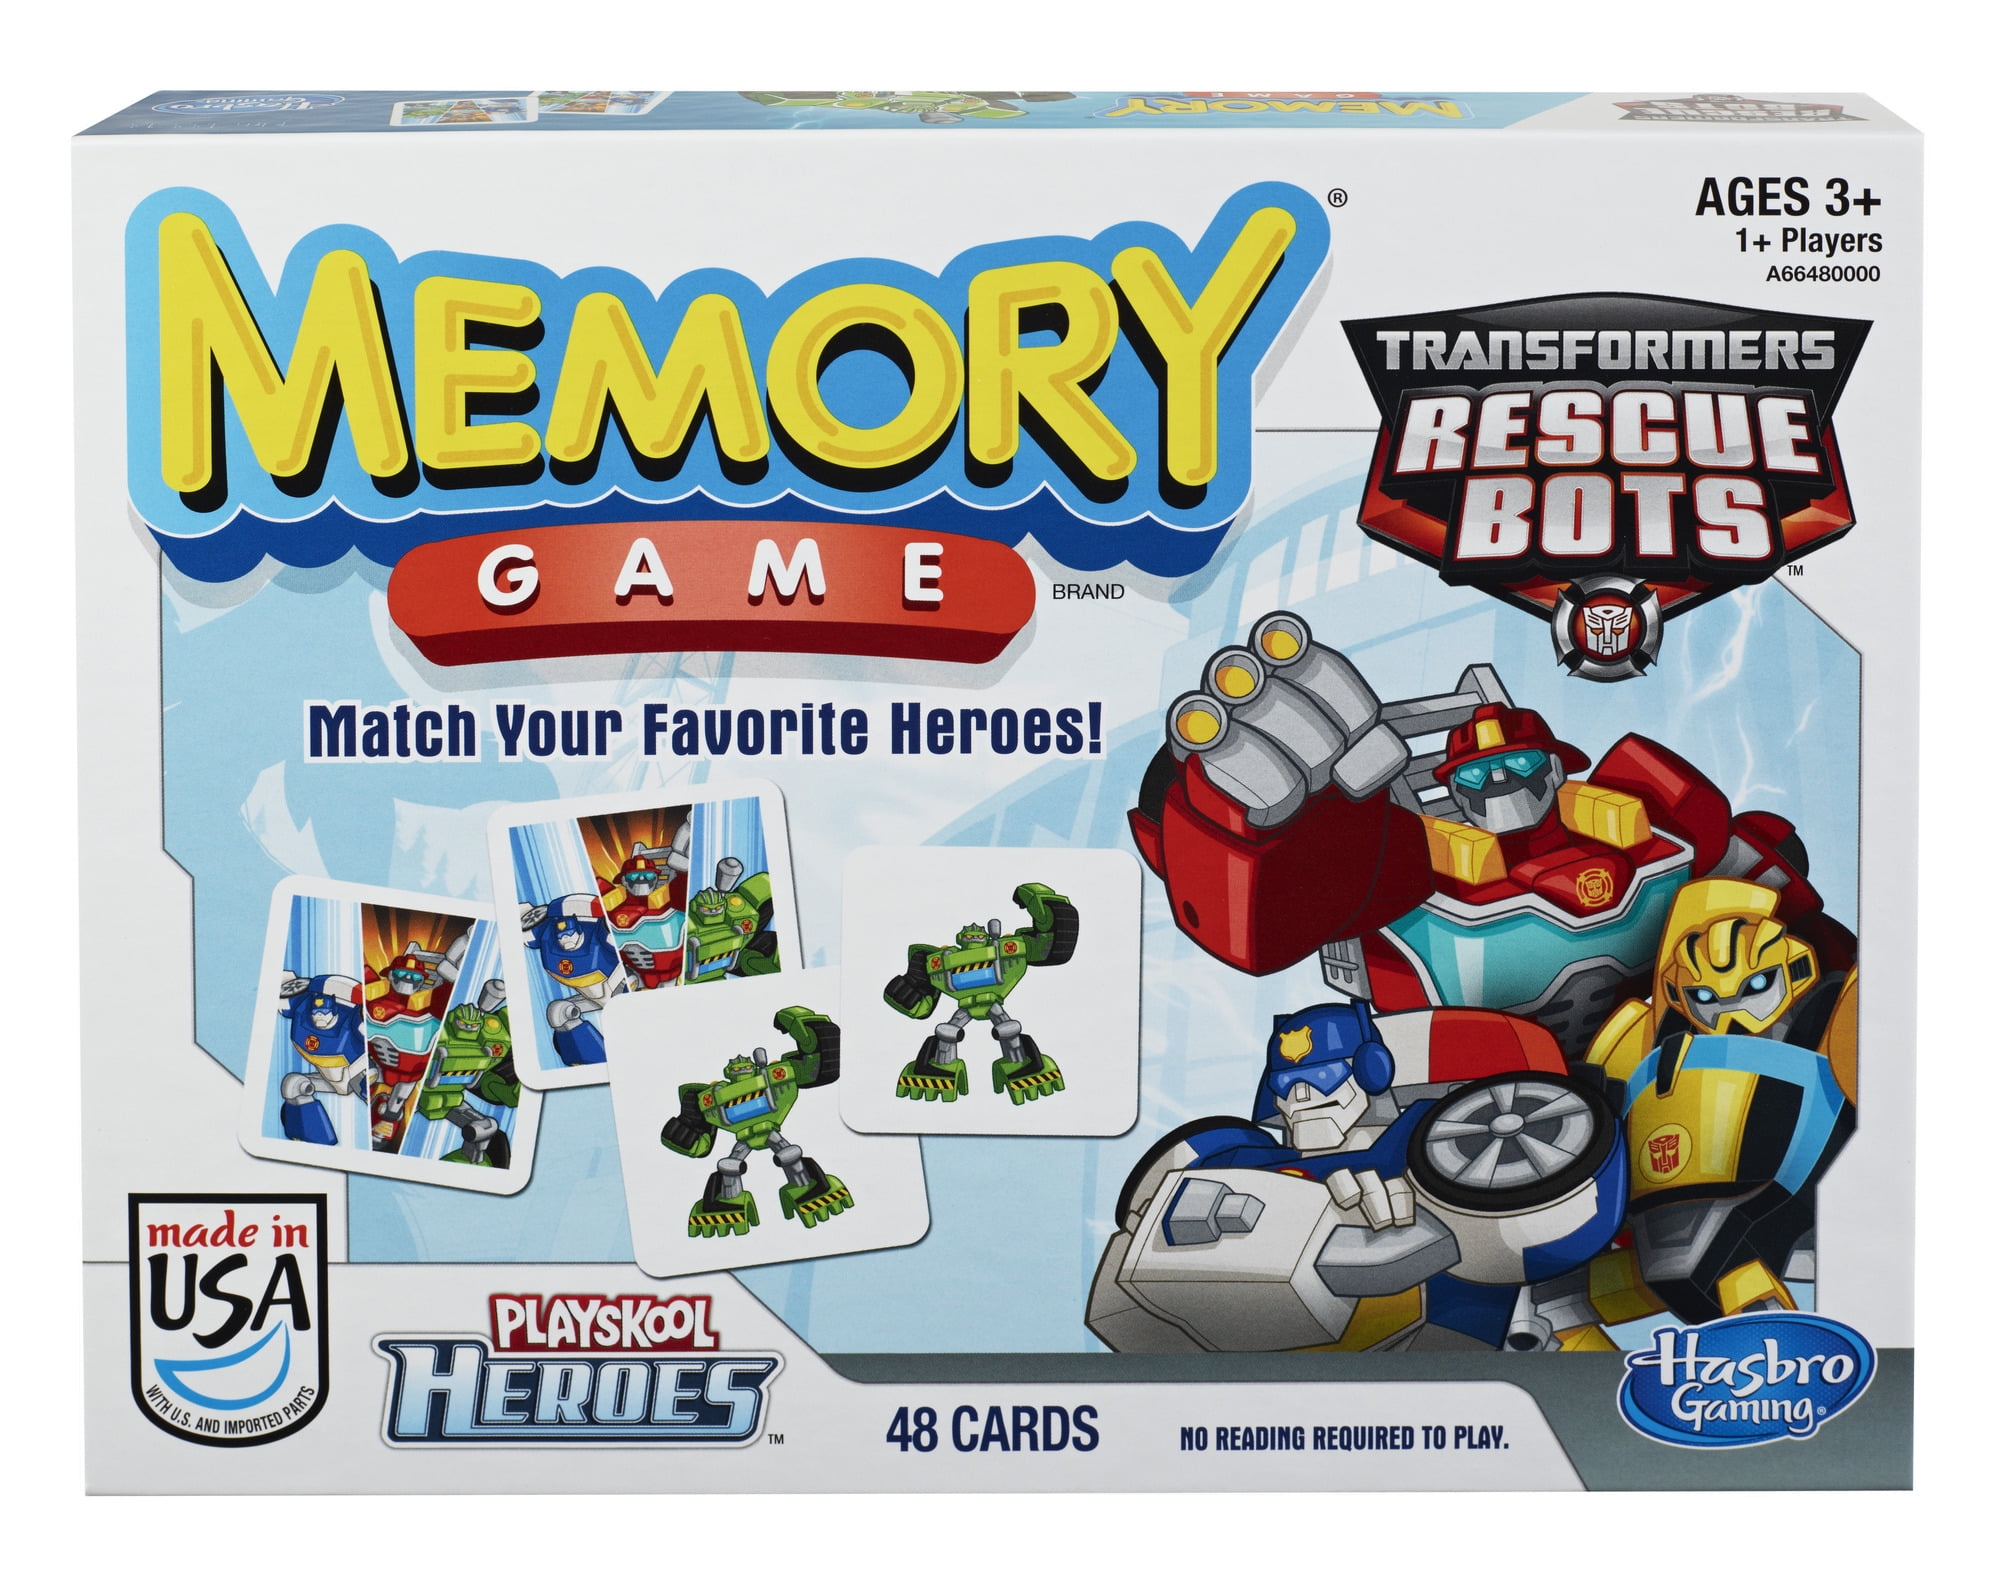 Simon Electronic Memory Game by Hasbro 2013 -tested for sale online